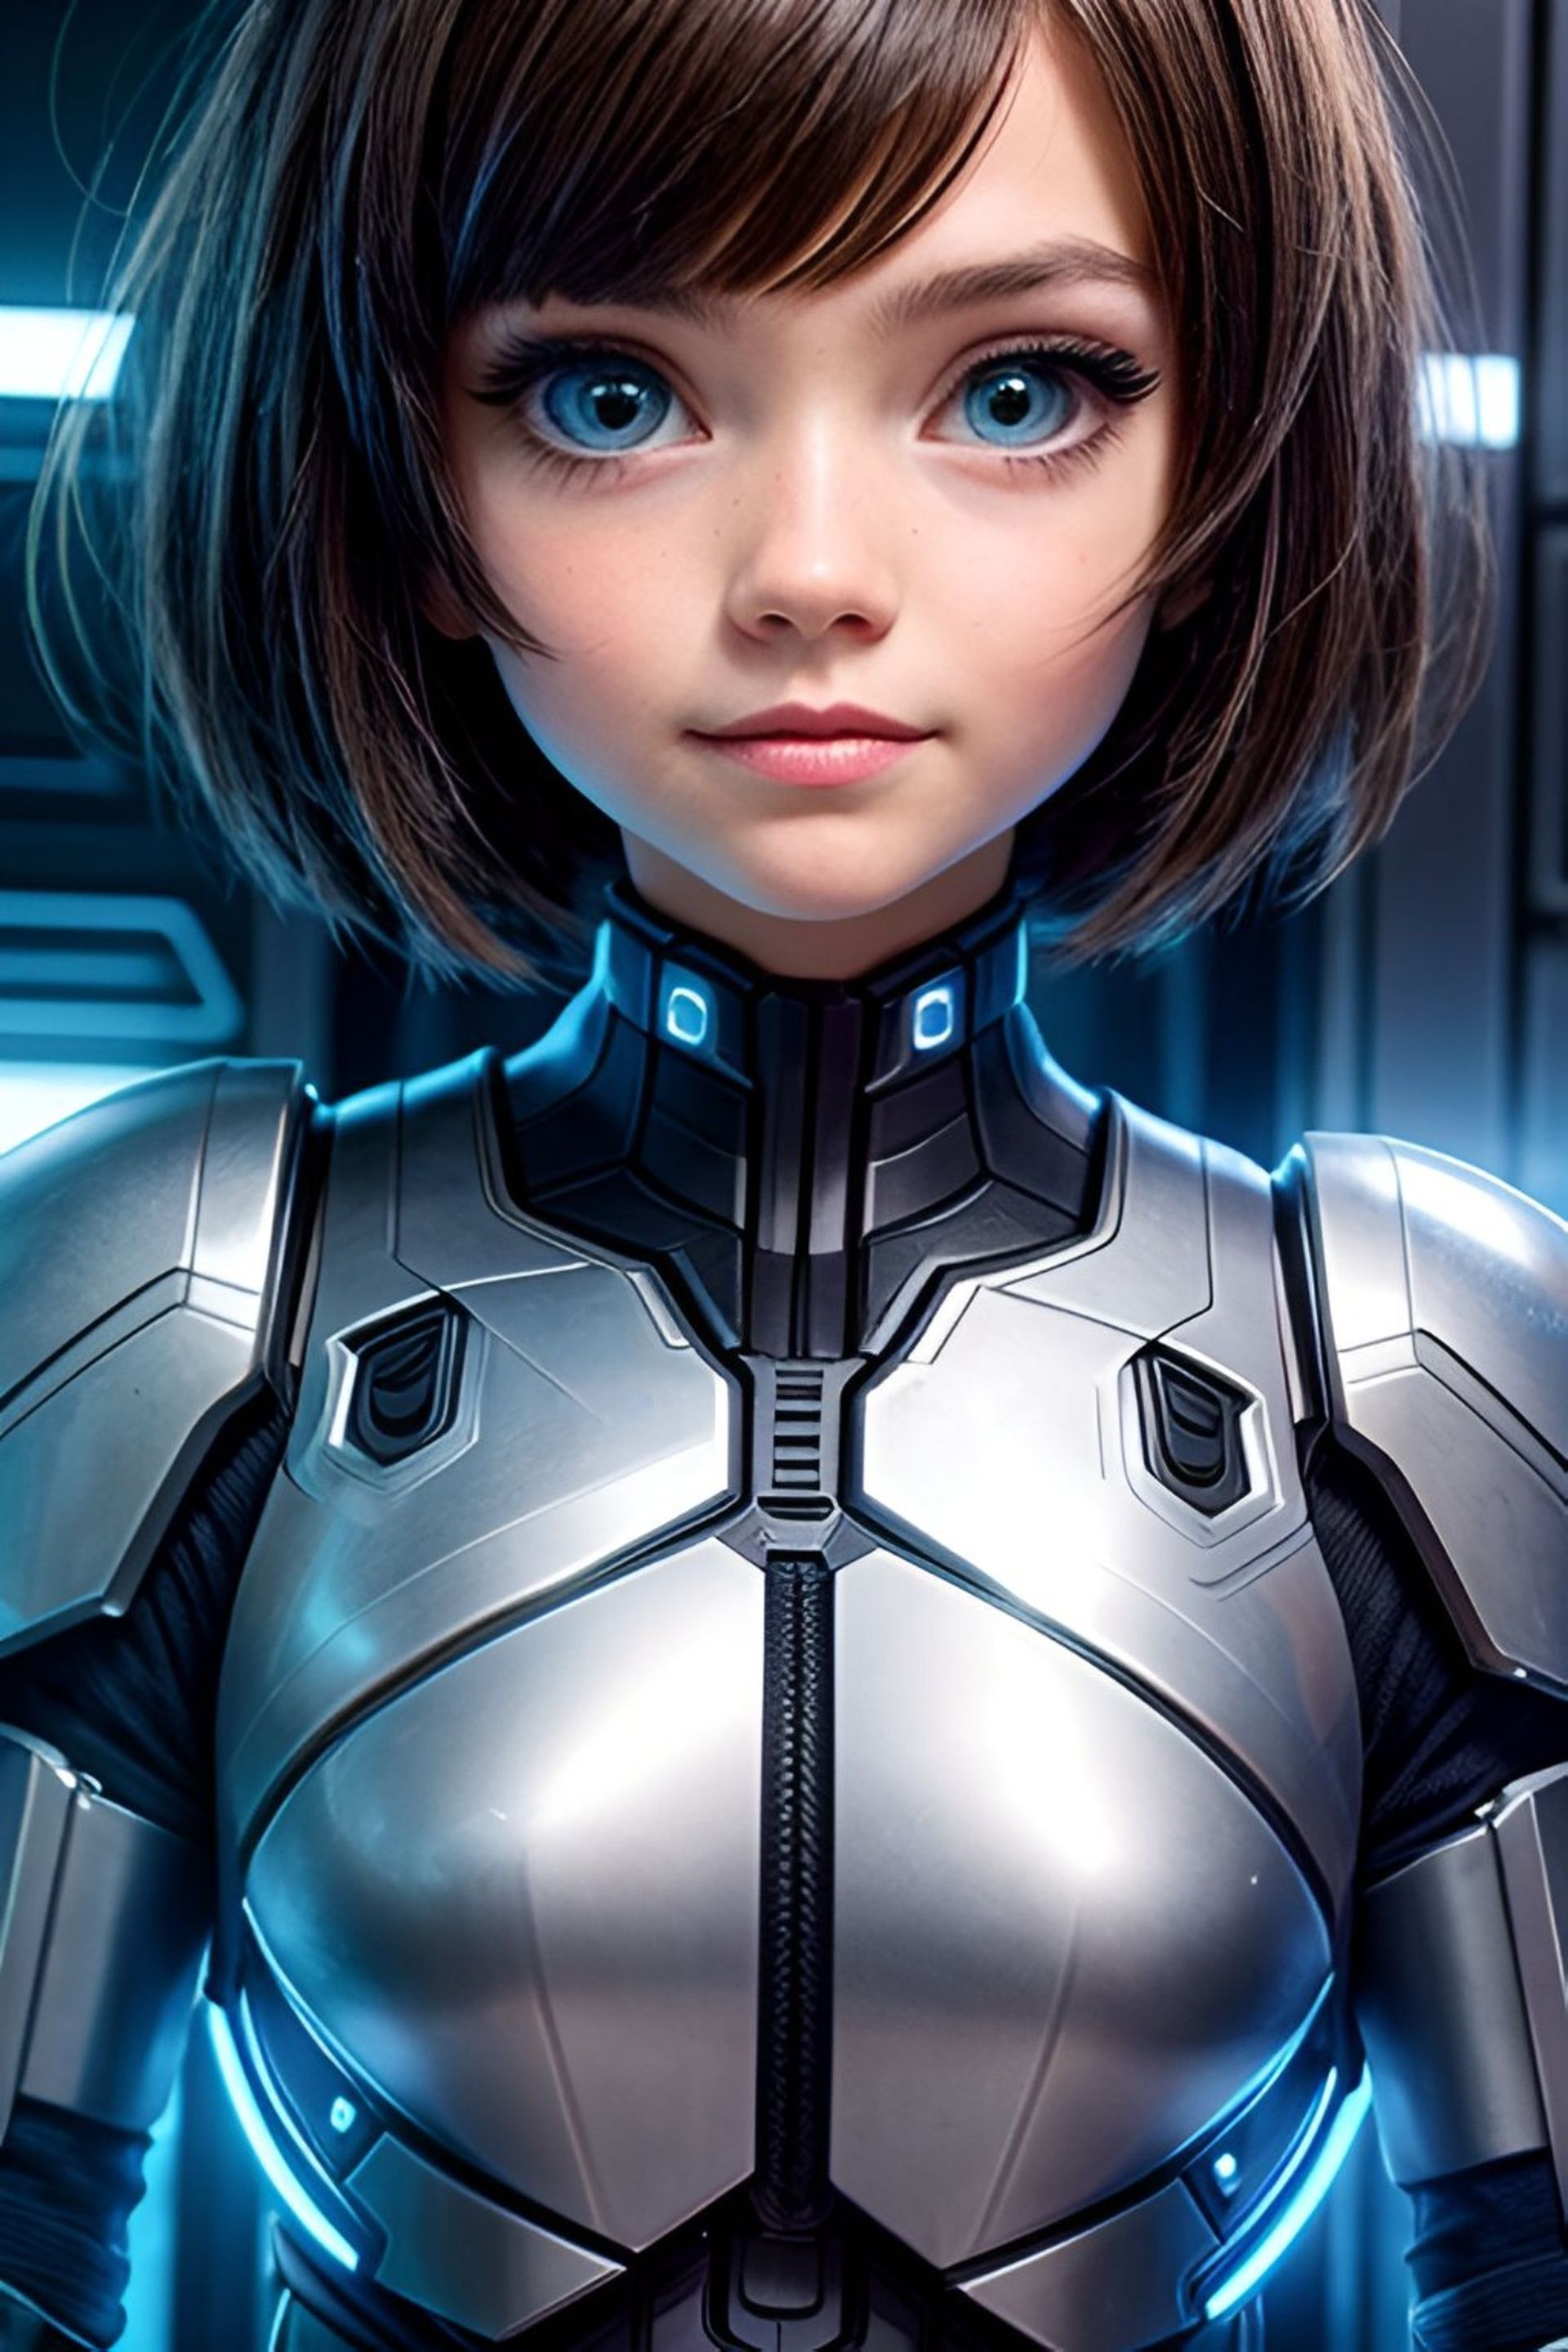 Free photo A girl, with short hair, wearing armor.